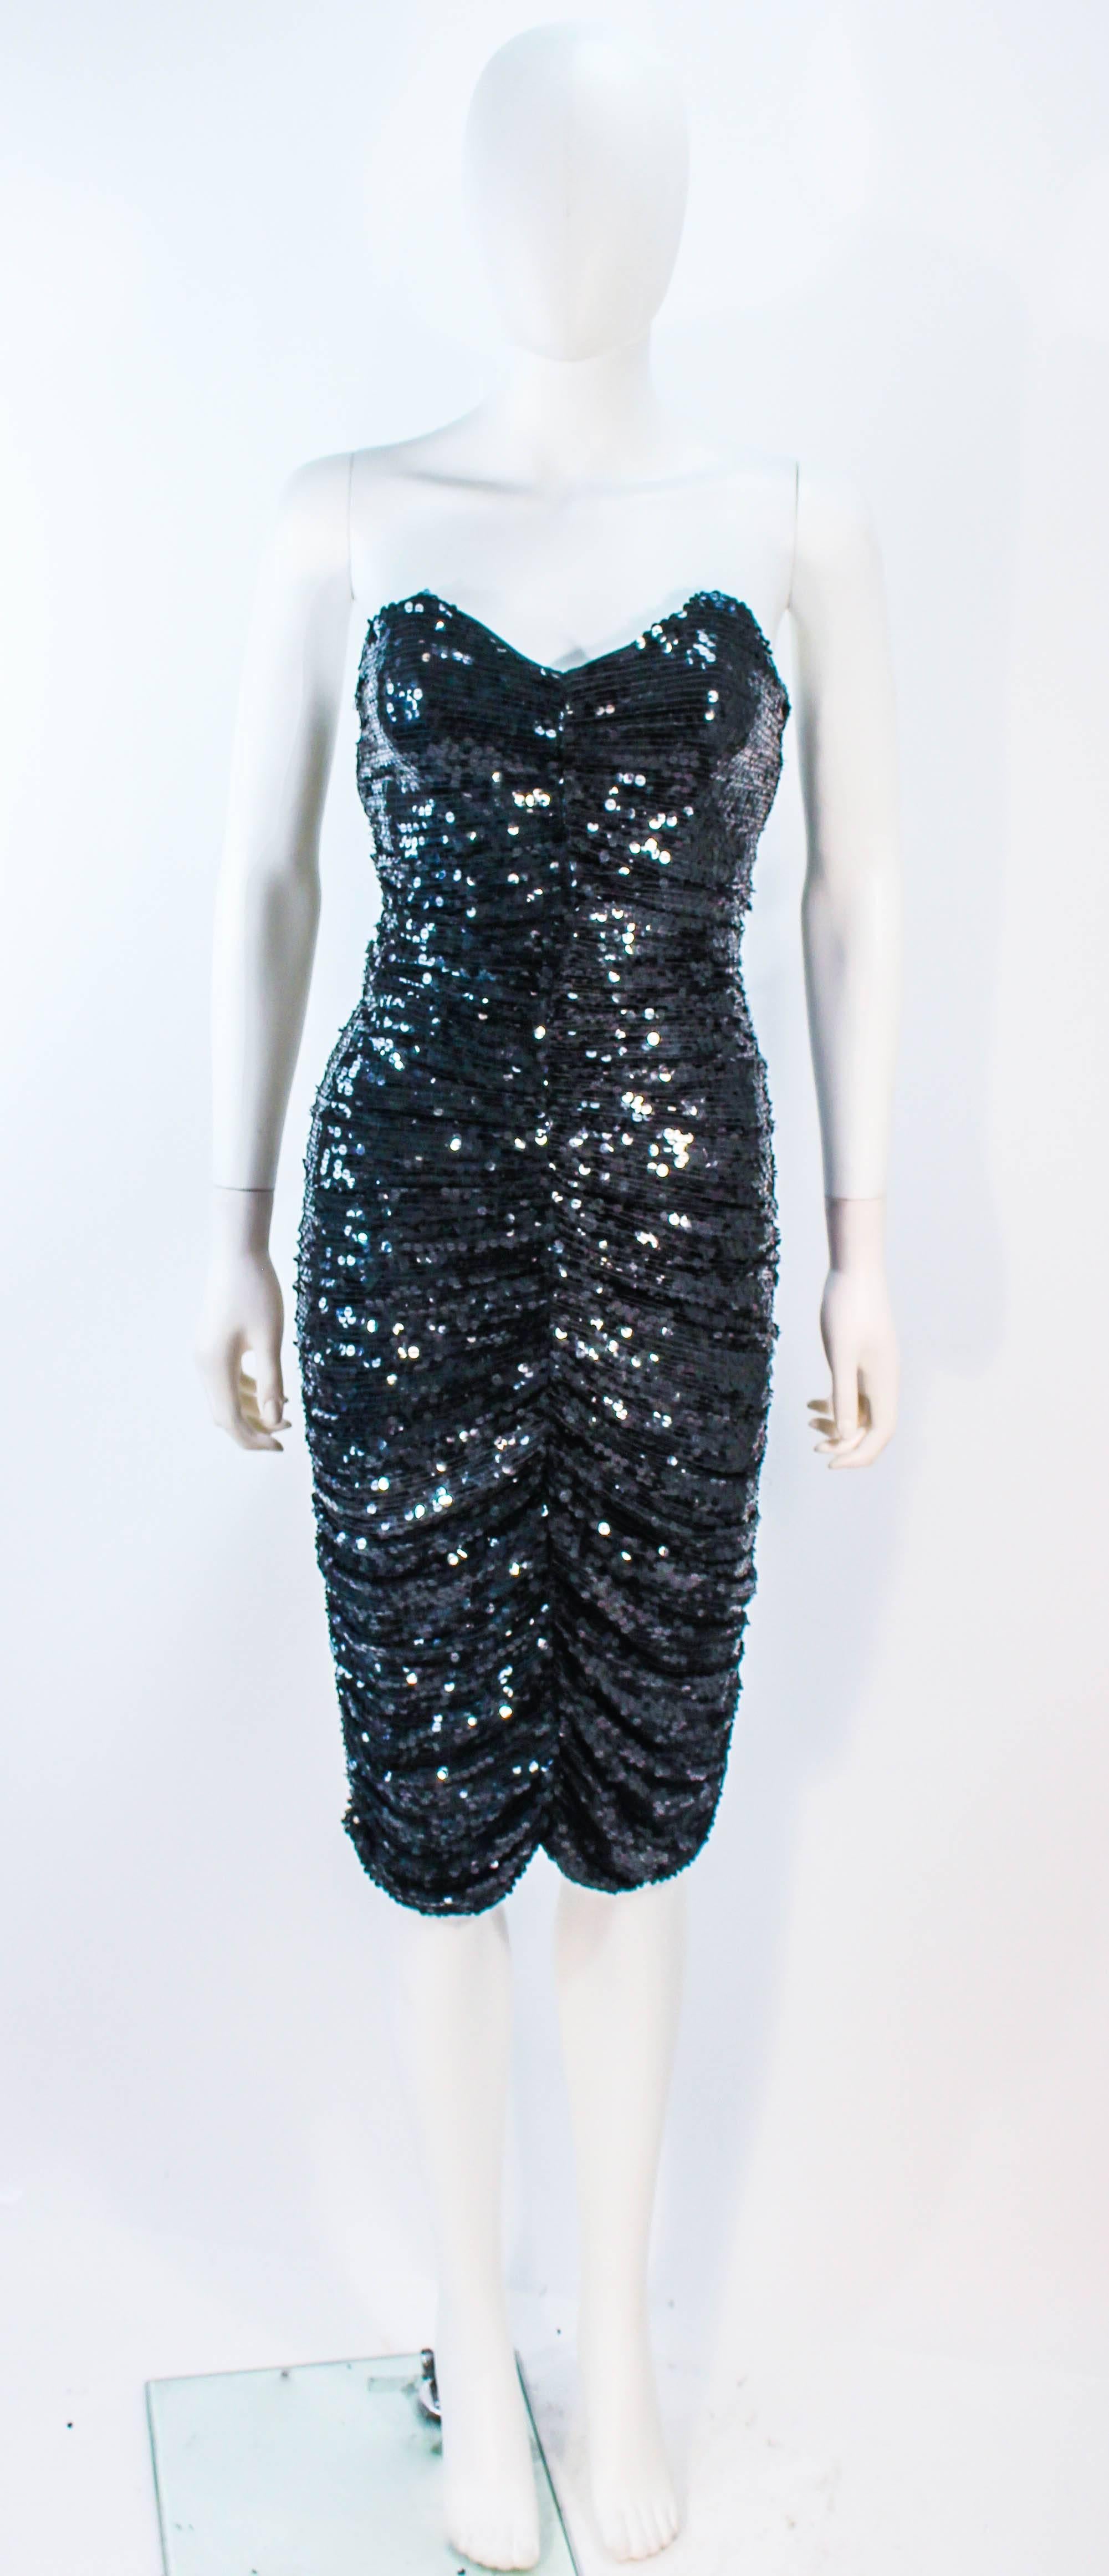 This Kozo vintage cocktail dress is composed of black silk with sequins. Features a sharp bust line and a ruched style with a center back zipper. In excellent condition. 

**Please cross-reference measurements for personal accuracy. Size in